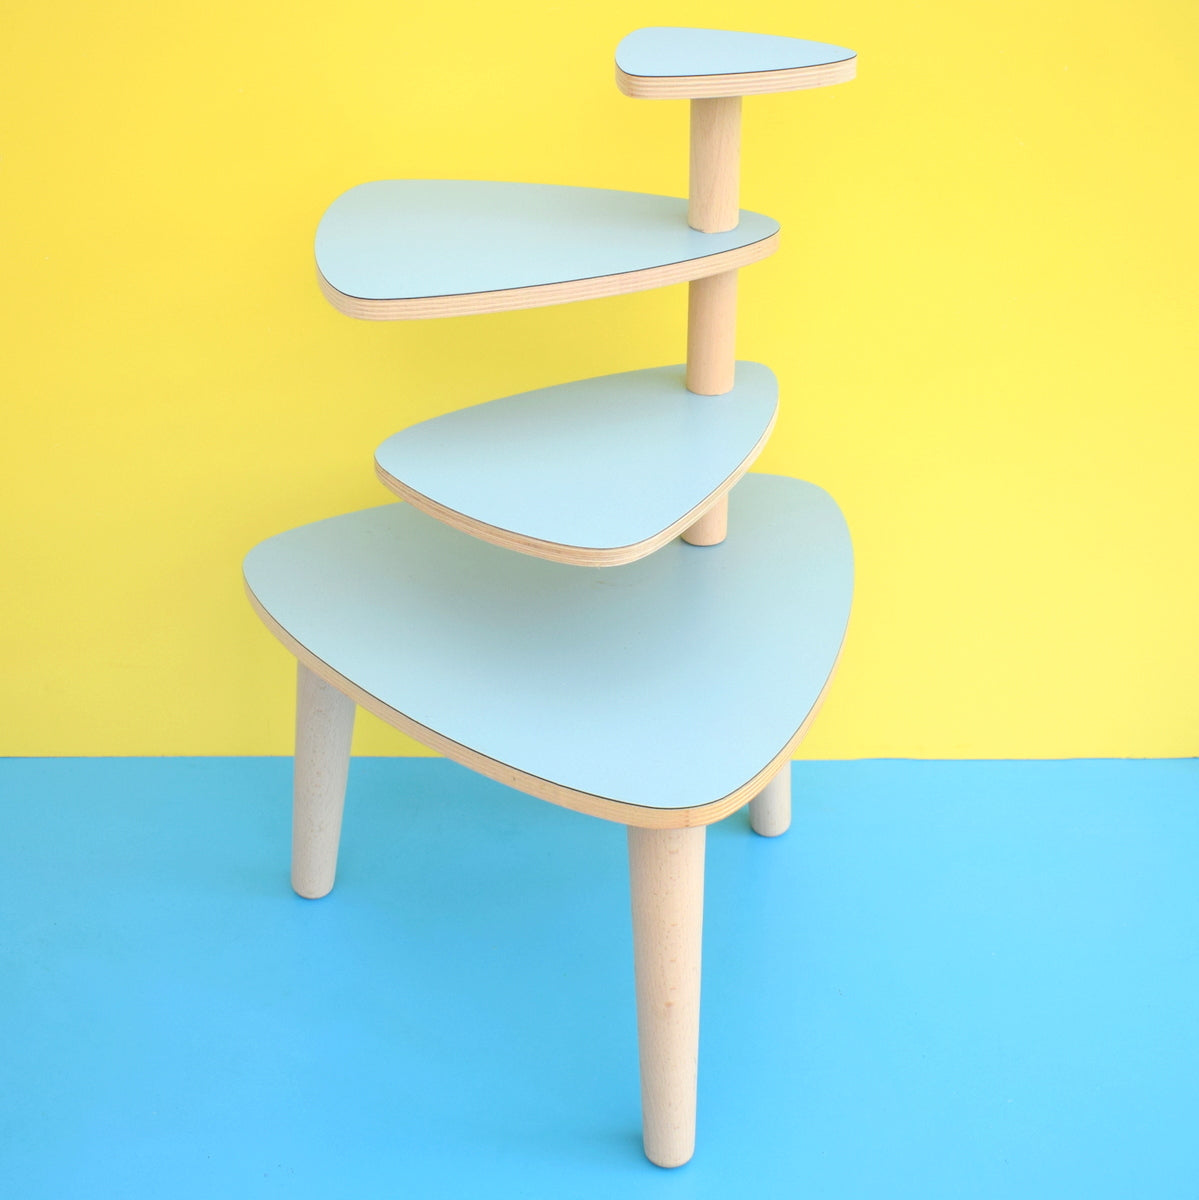 Vintage Formica Tiered Plant Stand / Table - Pale Blue Formica Tops